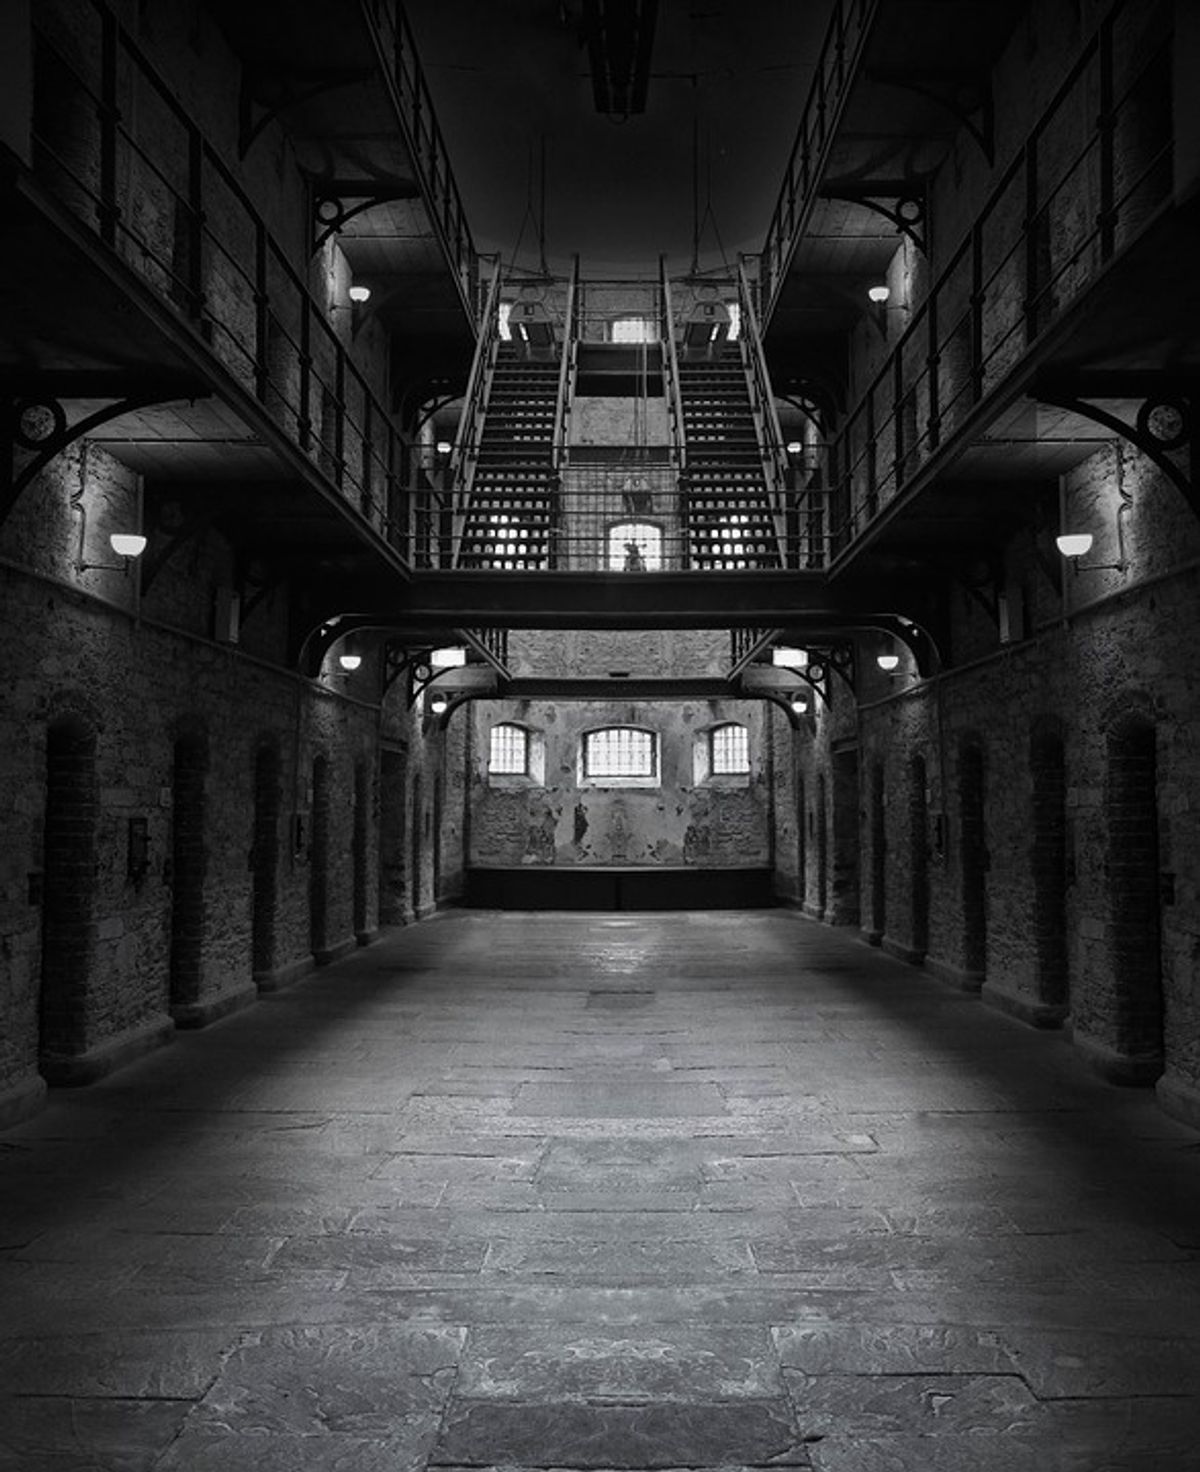 People Reveal The Most Extreme Thing They've Seen In Lockup